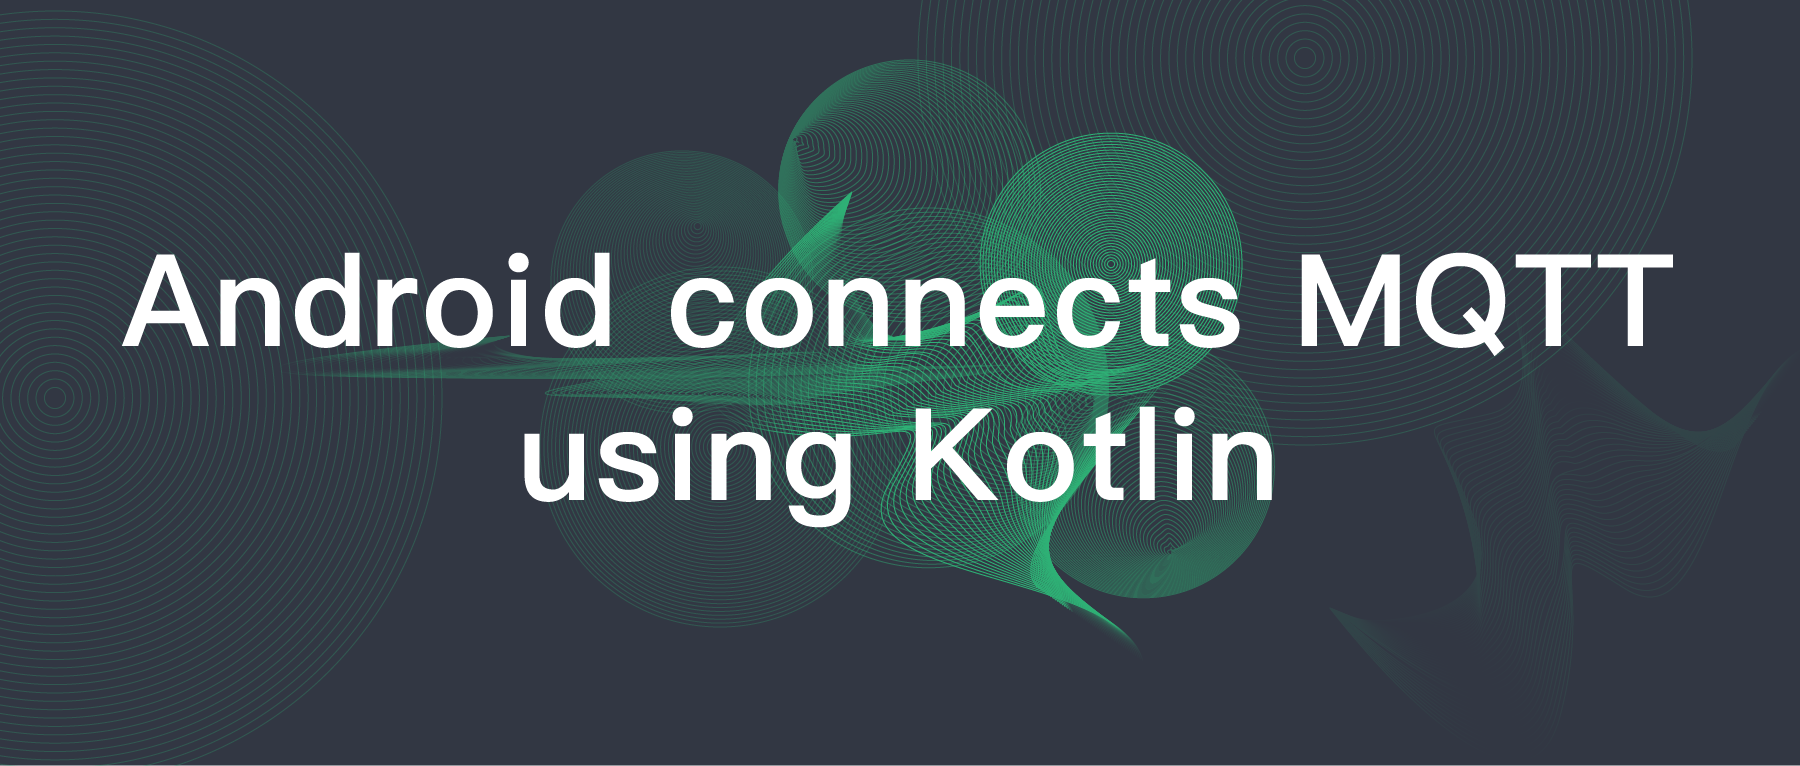 Android connects MQTT using Kotlin | EMQ